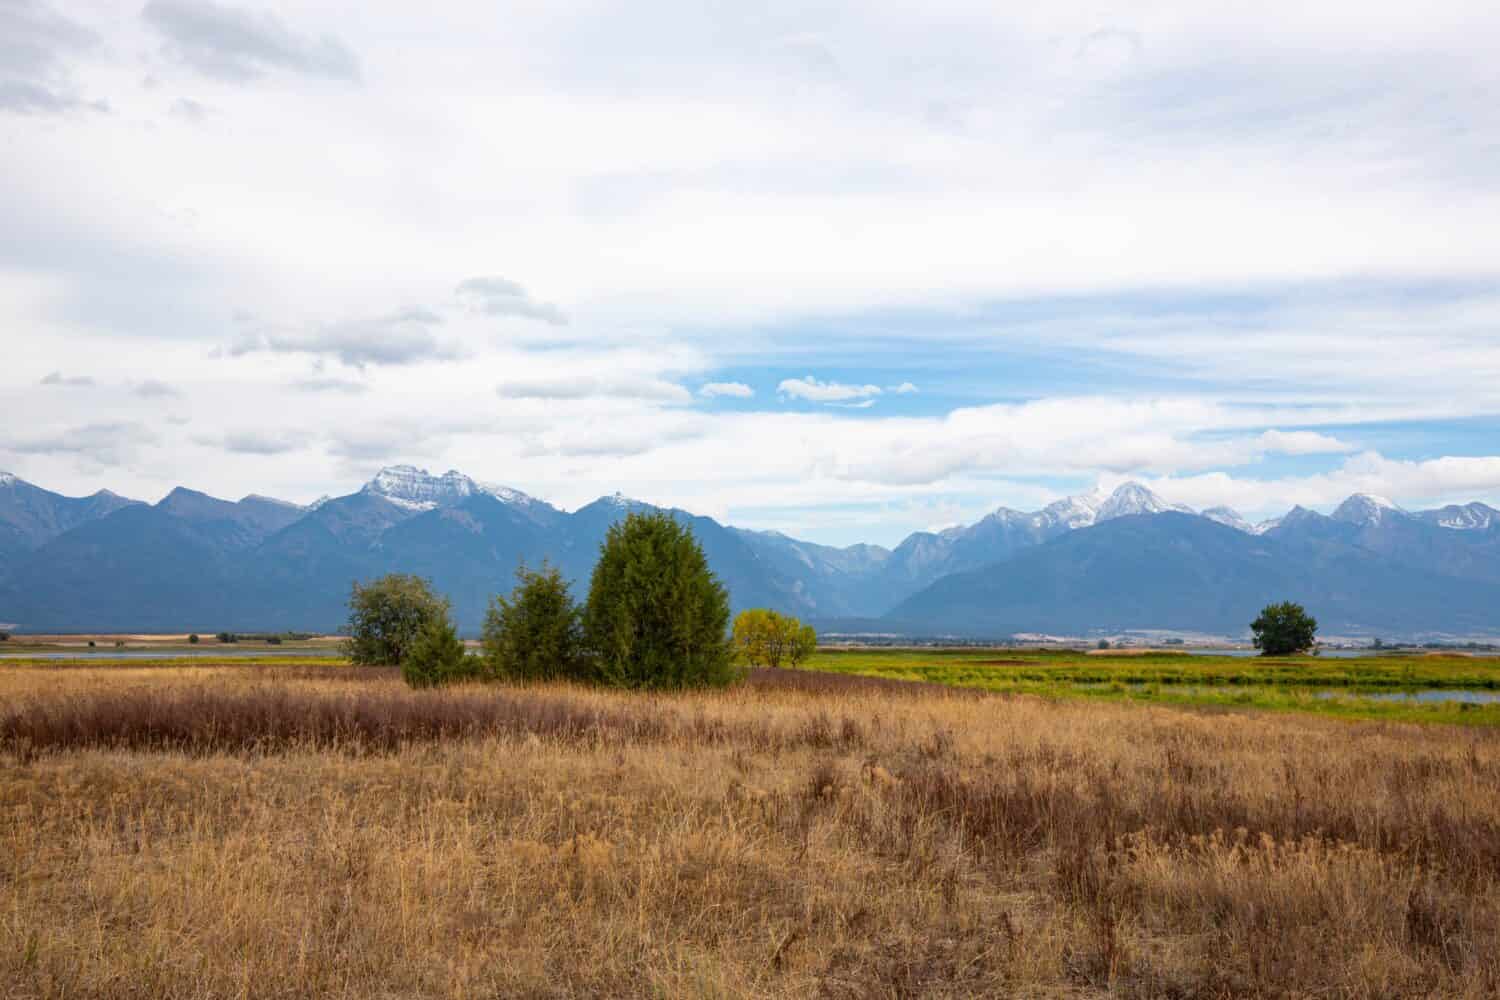 Destination scenic view over grasslands and out toward distant snow clad mountains of Bison Range Reserve on Flathead Indian Reservation in Montana